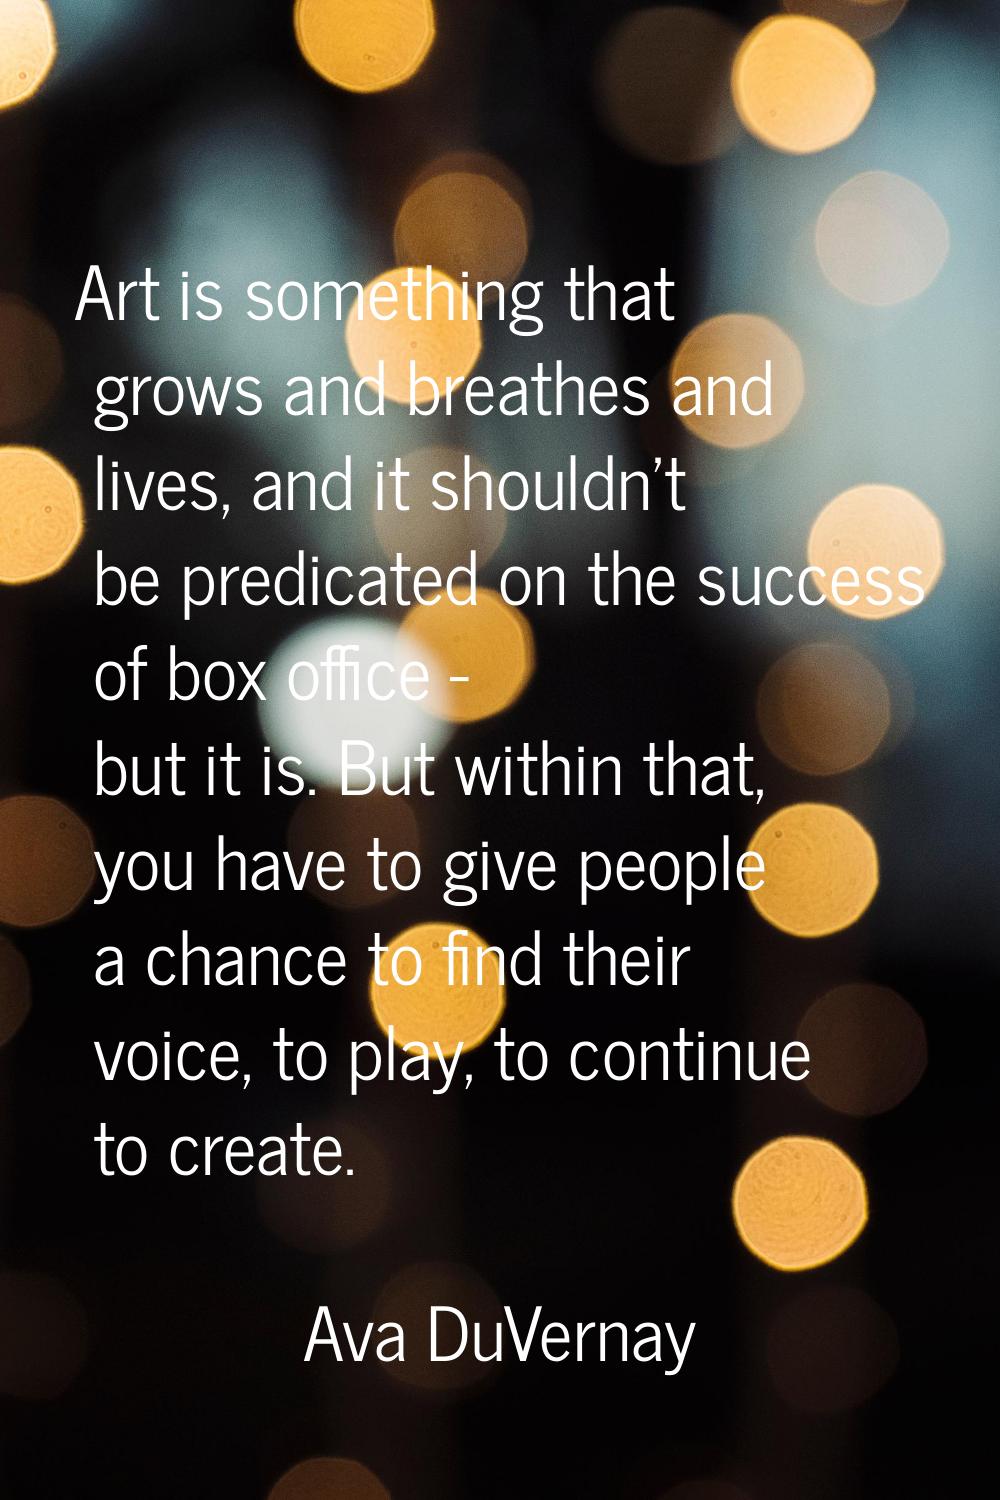 Art is something that grows and breathes and lives, and it shouldn't be predicated on the success o